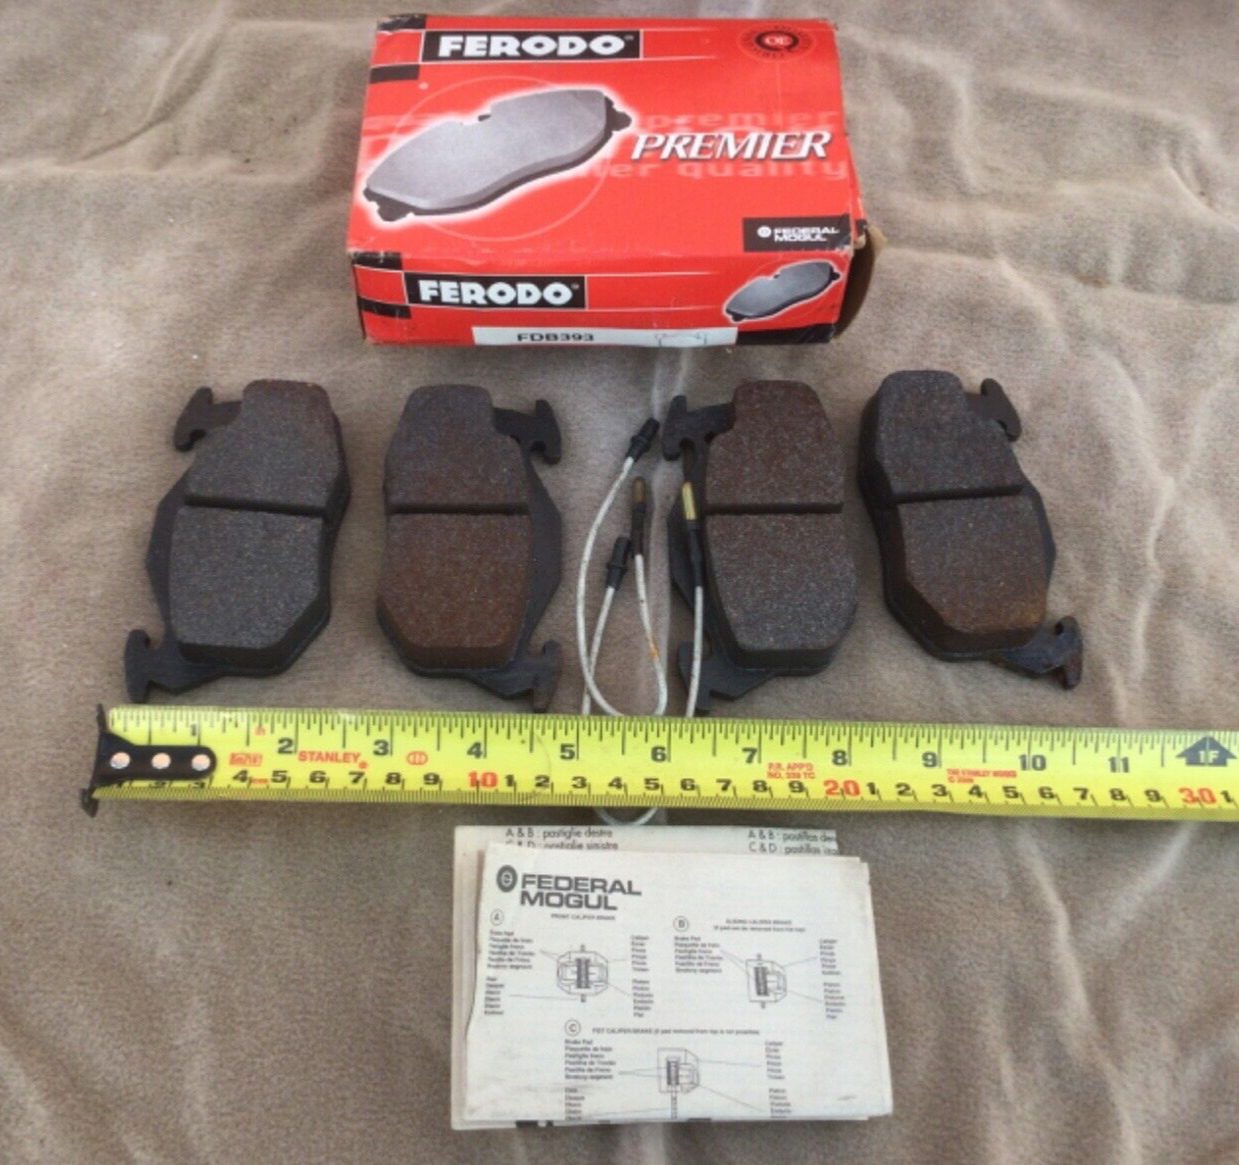 Ferodo FDB393 front brake pads for Renault R9 R11 R19 and Clio